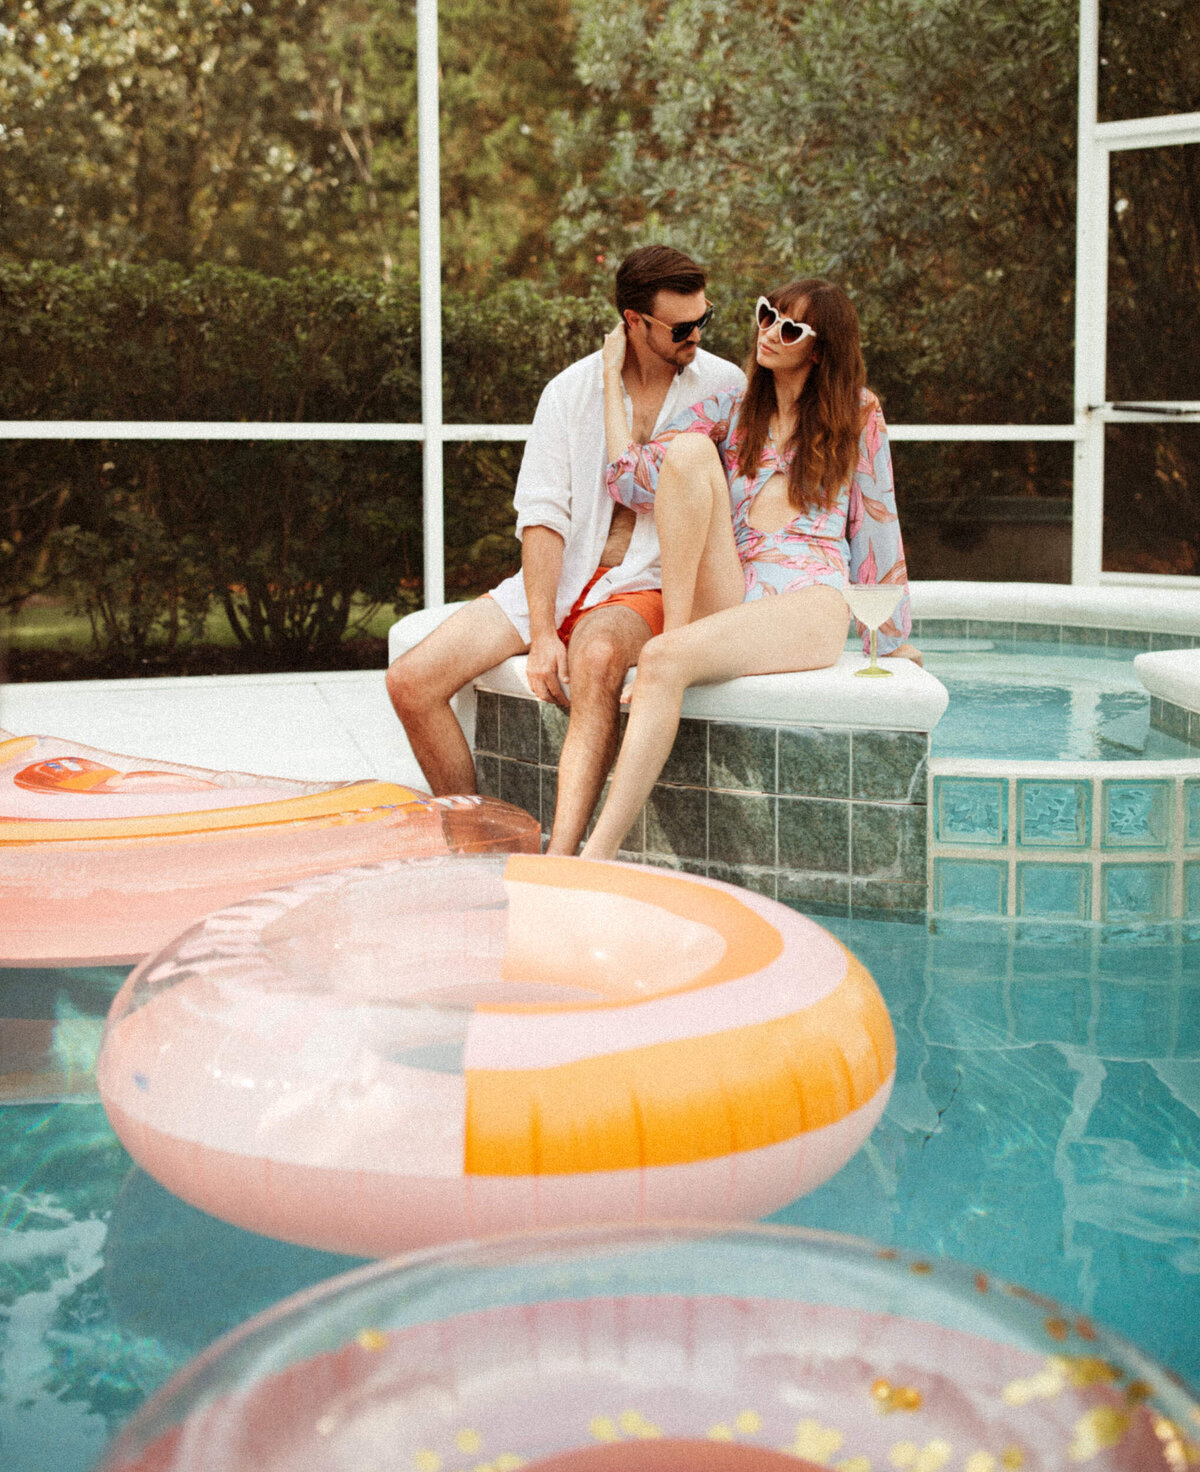 Girl in a retro swimsuit an sunglasses sitting beside a guy in swim trunks and a white button up on the edge of a swimming pool surrounded by floats